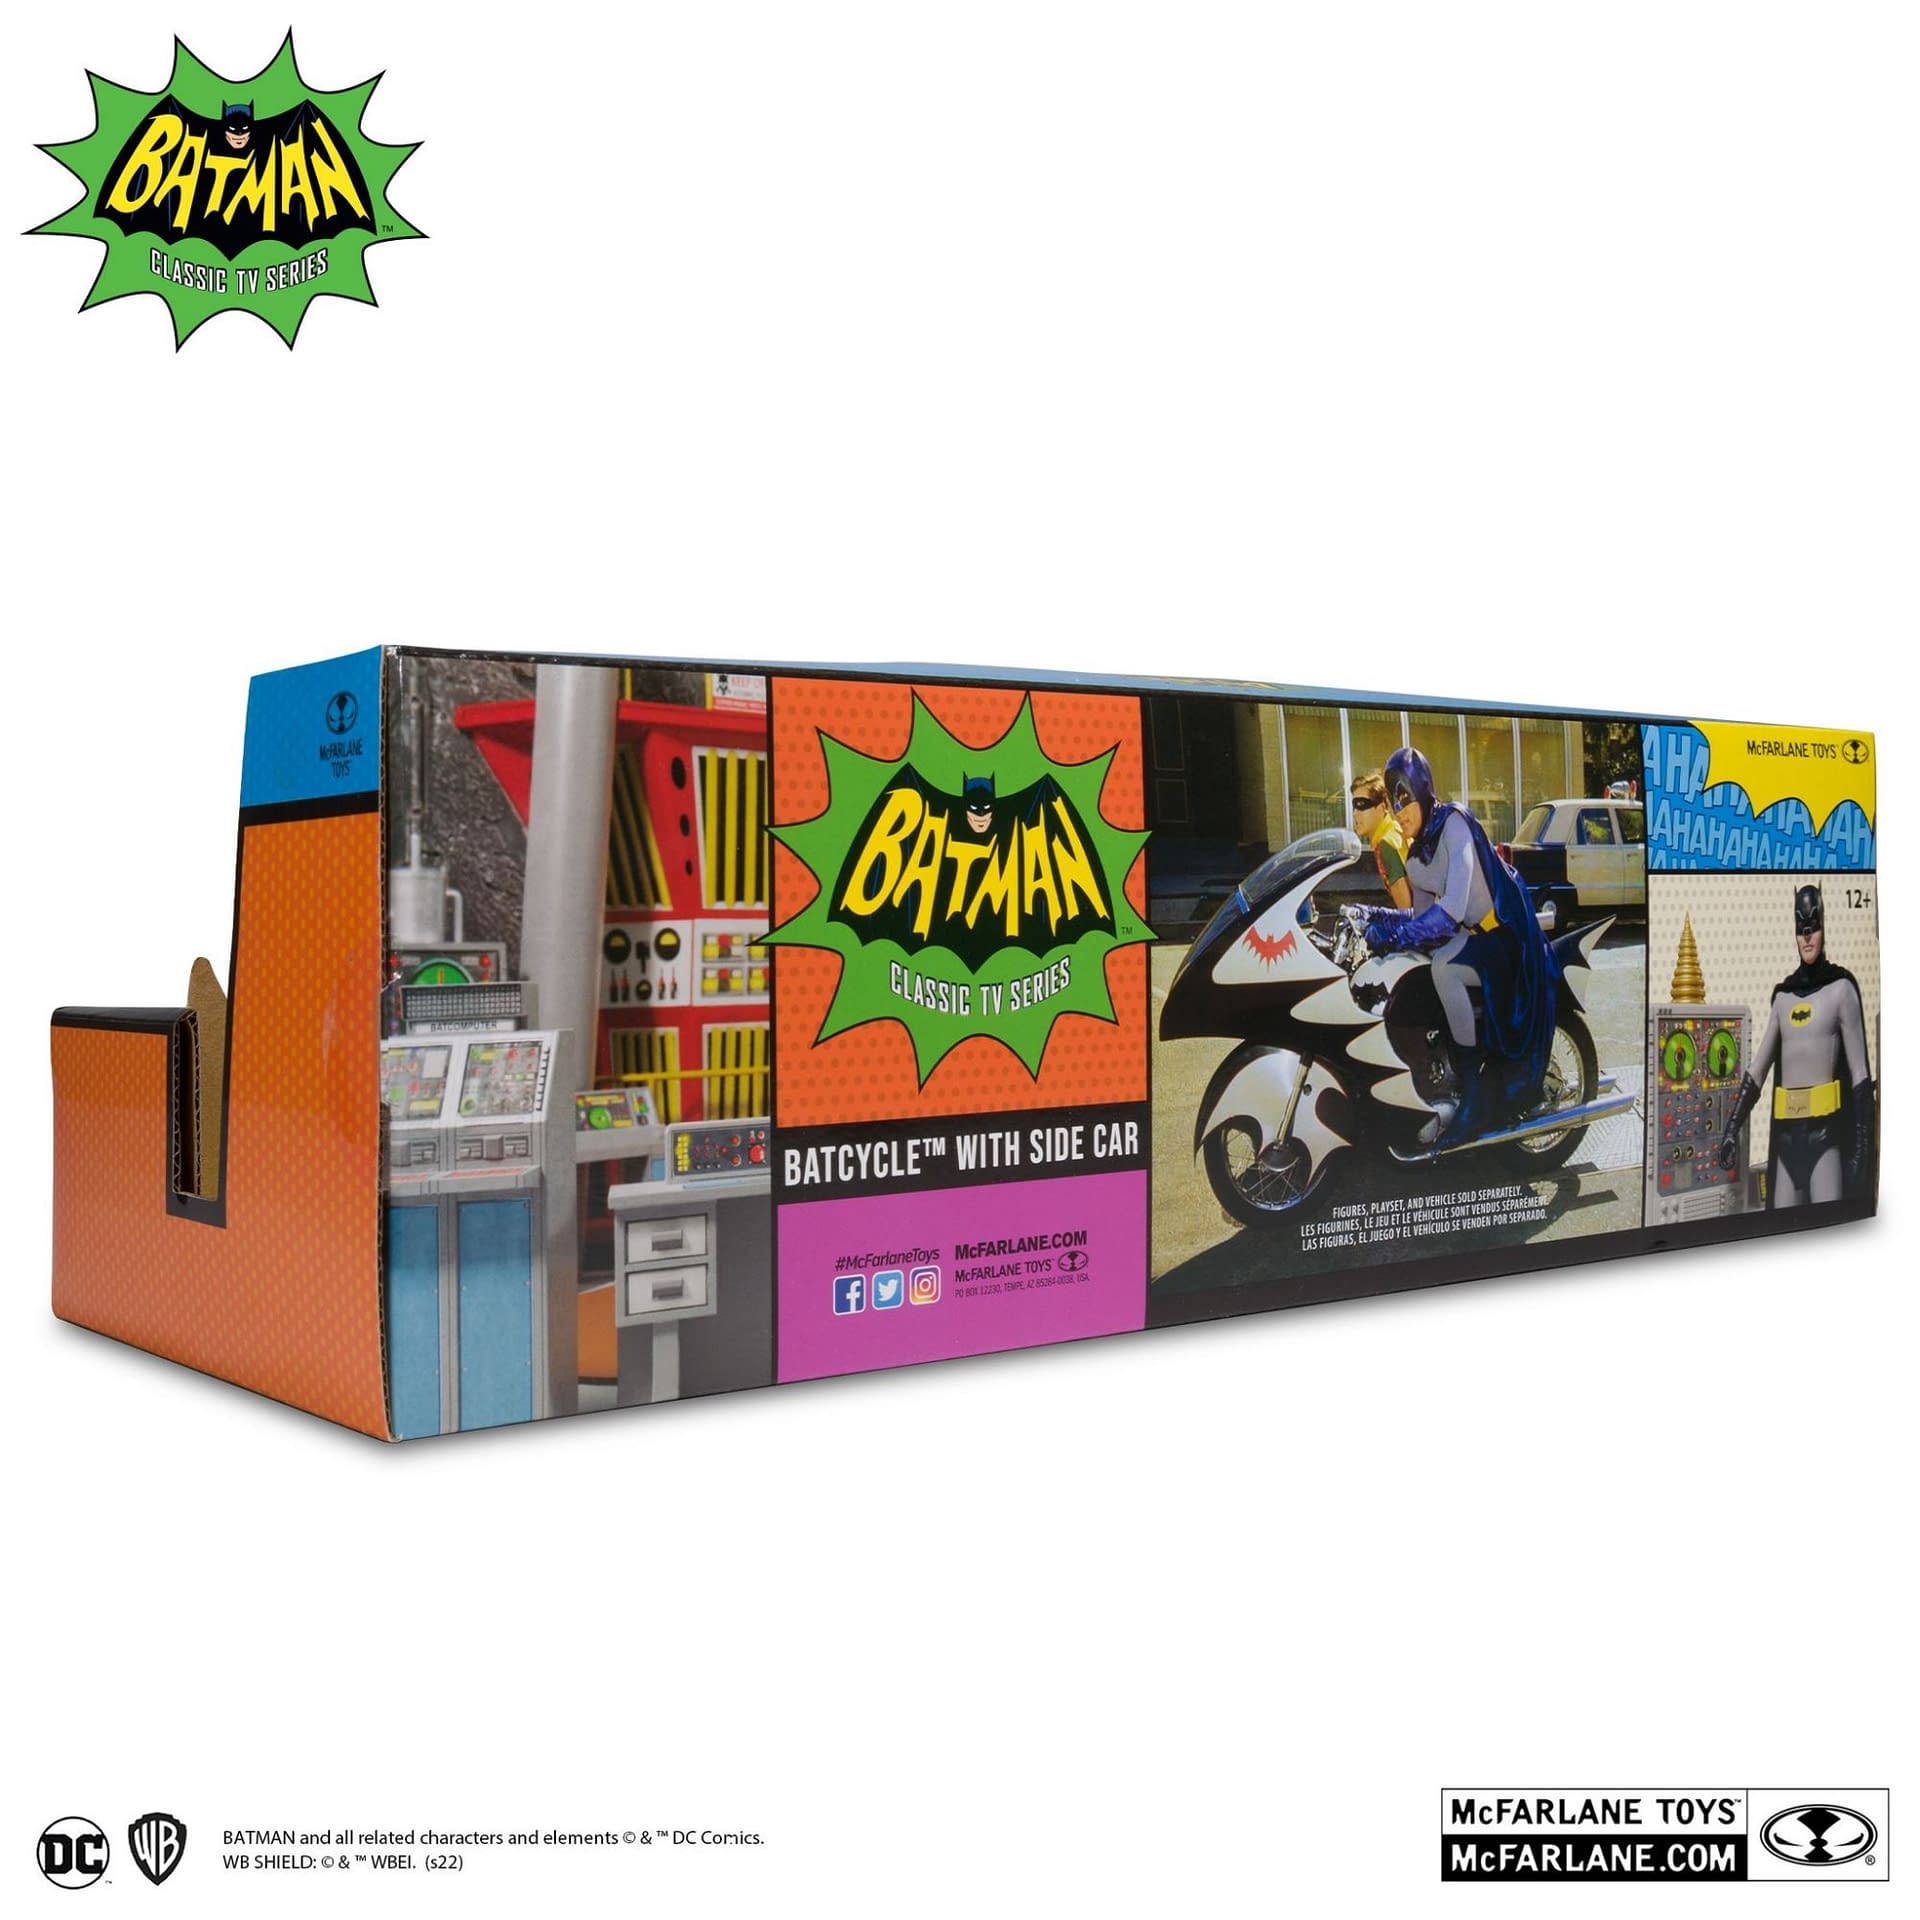 Rev Your Engines with McFarlane's New Batman 66' Batcycle